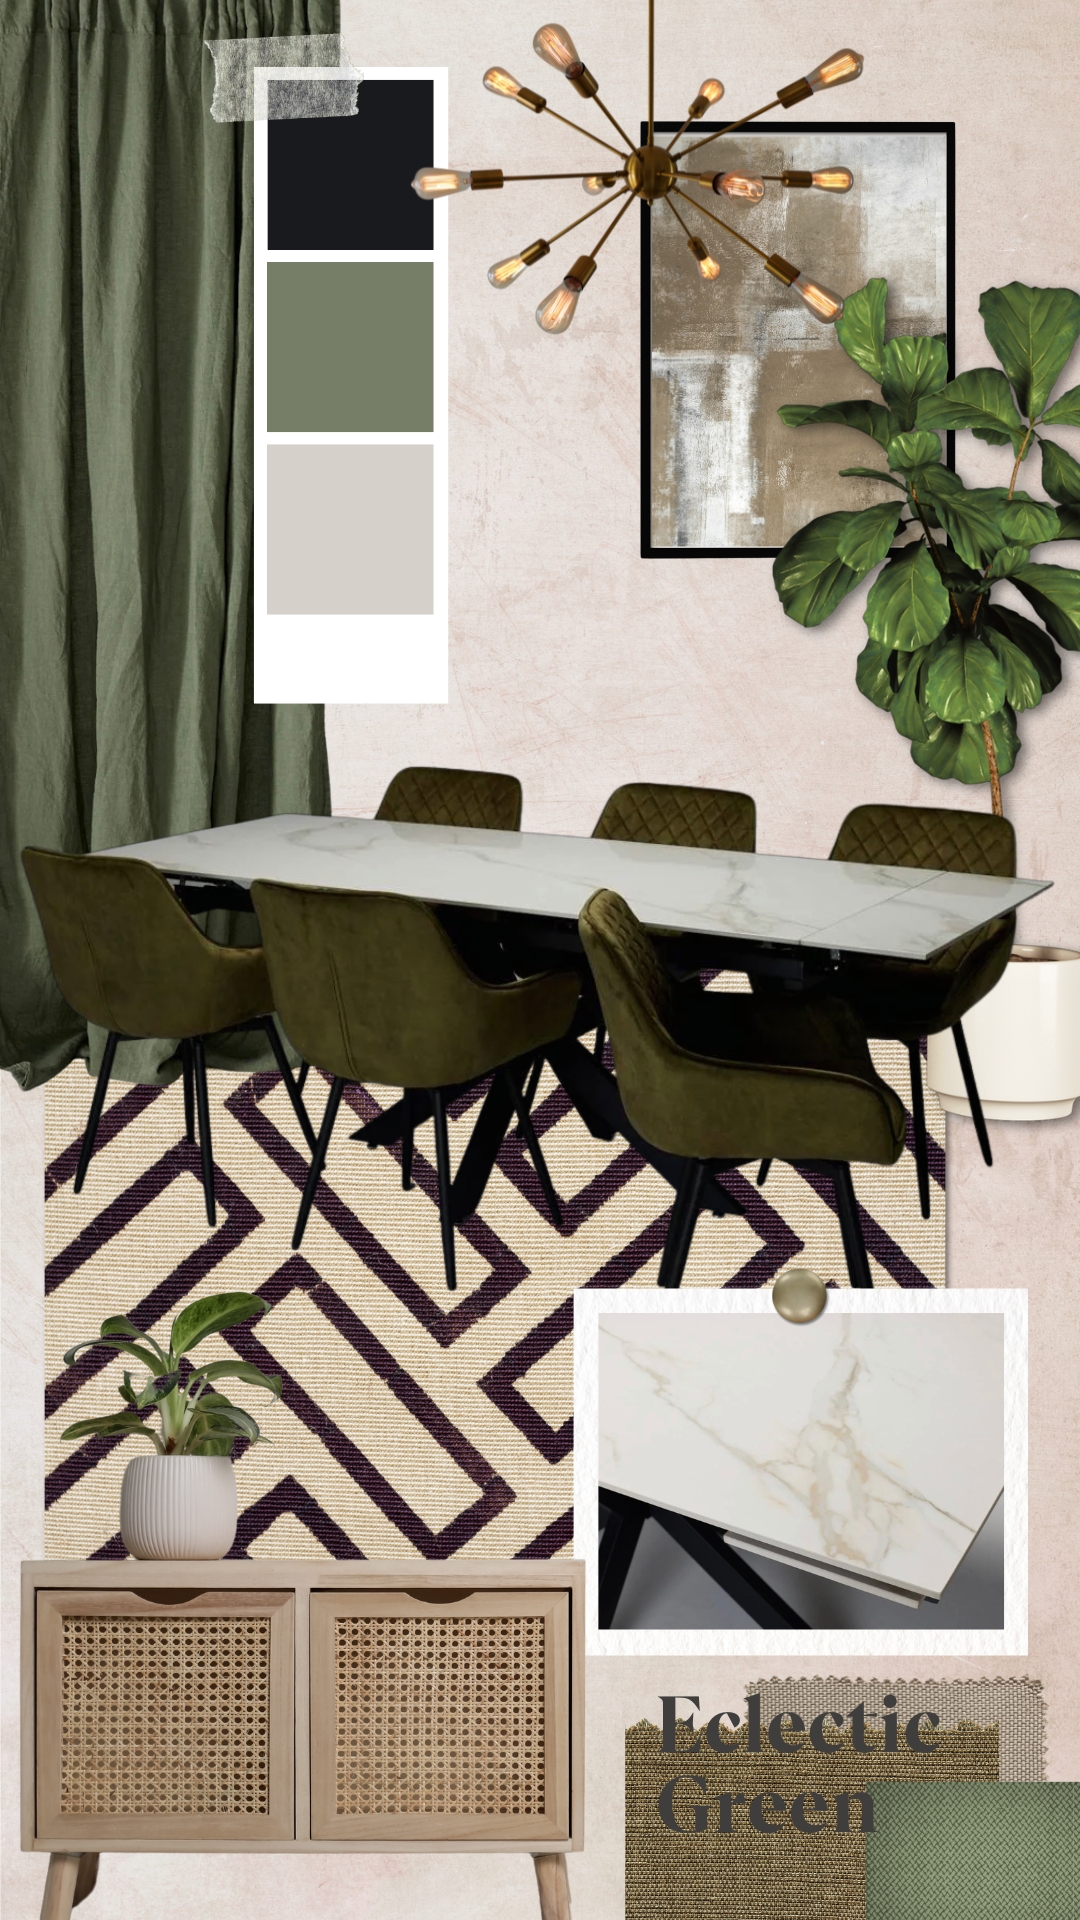 Extendable Stone Dining Table - Eclectic Green Mood Board